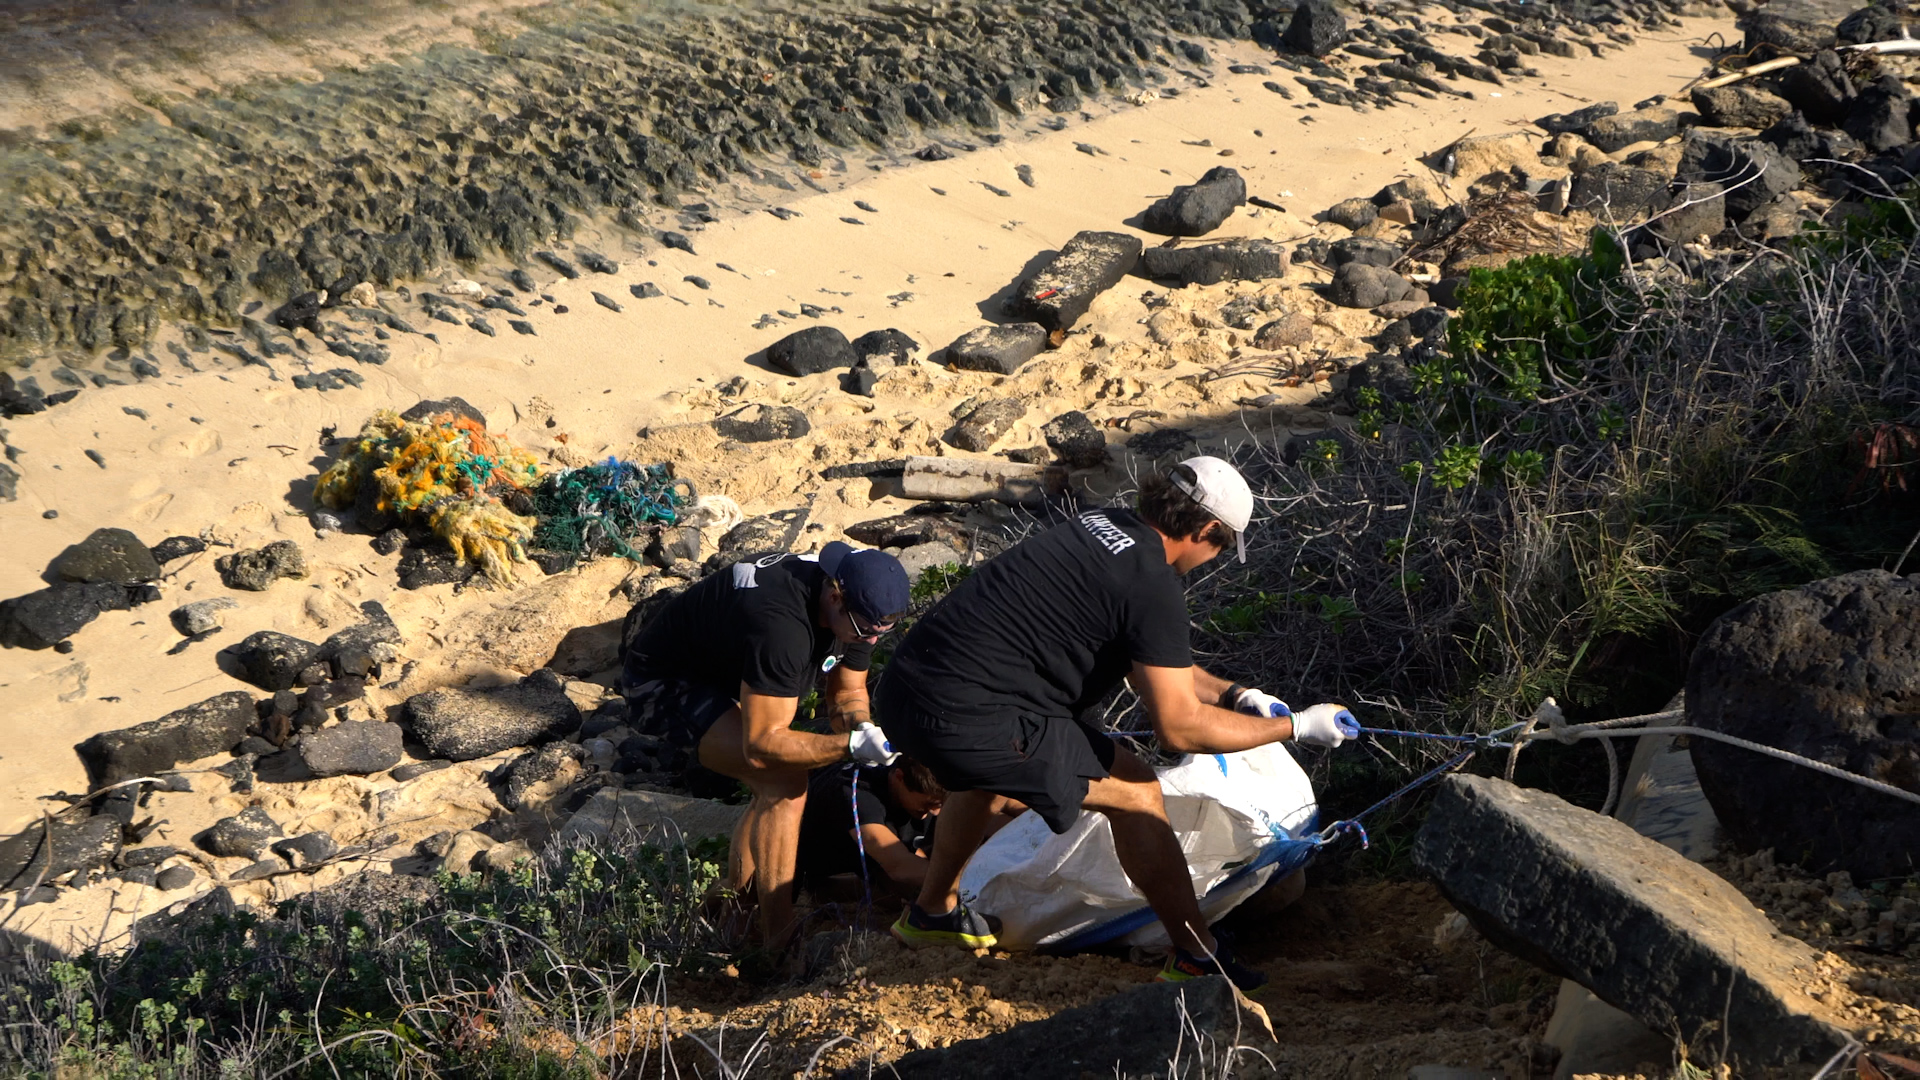 Our cleanup team removing derelict fishing gear from a remote coastline on Oahu, Hawaii